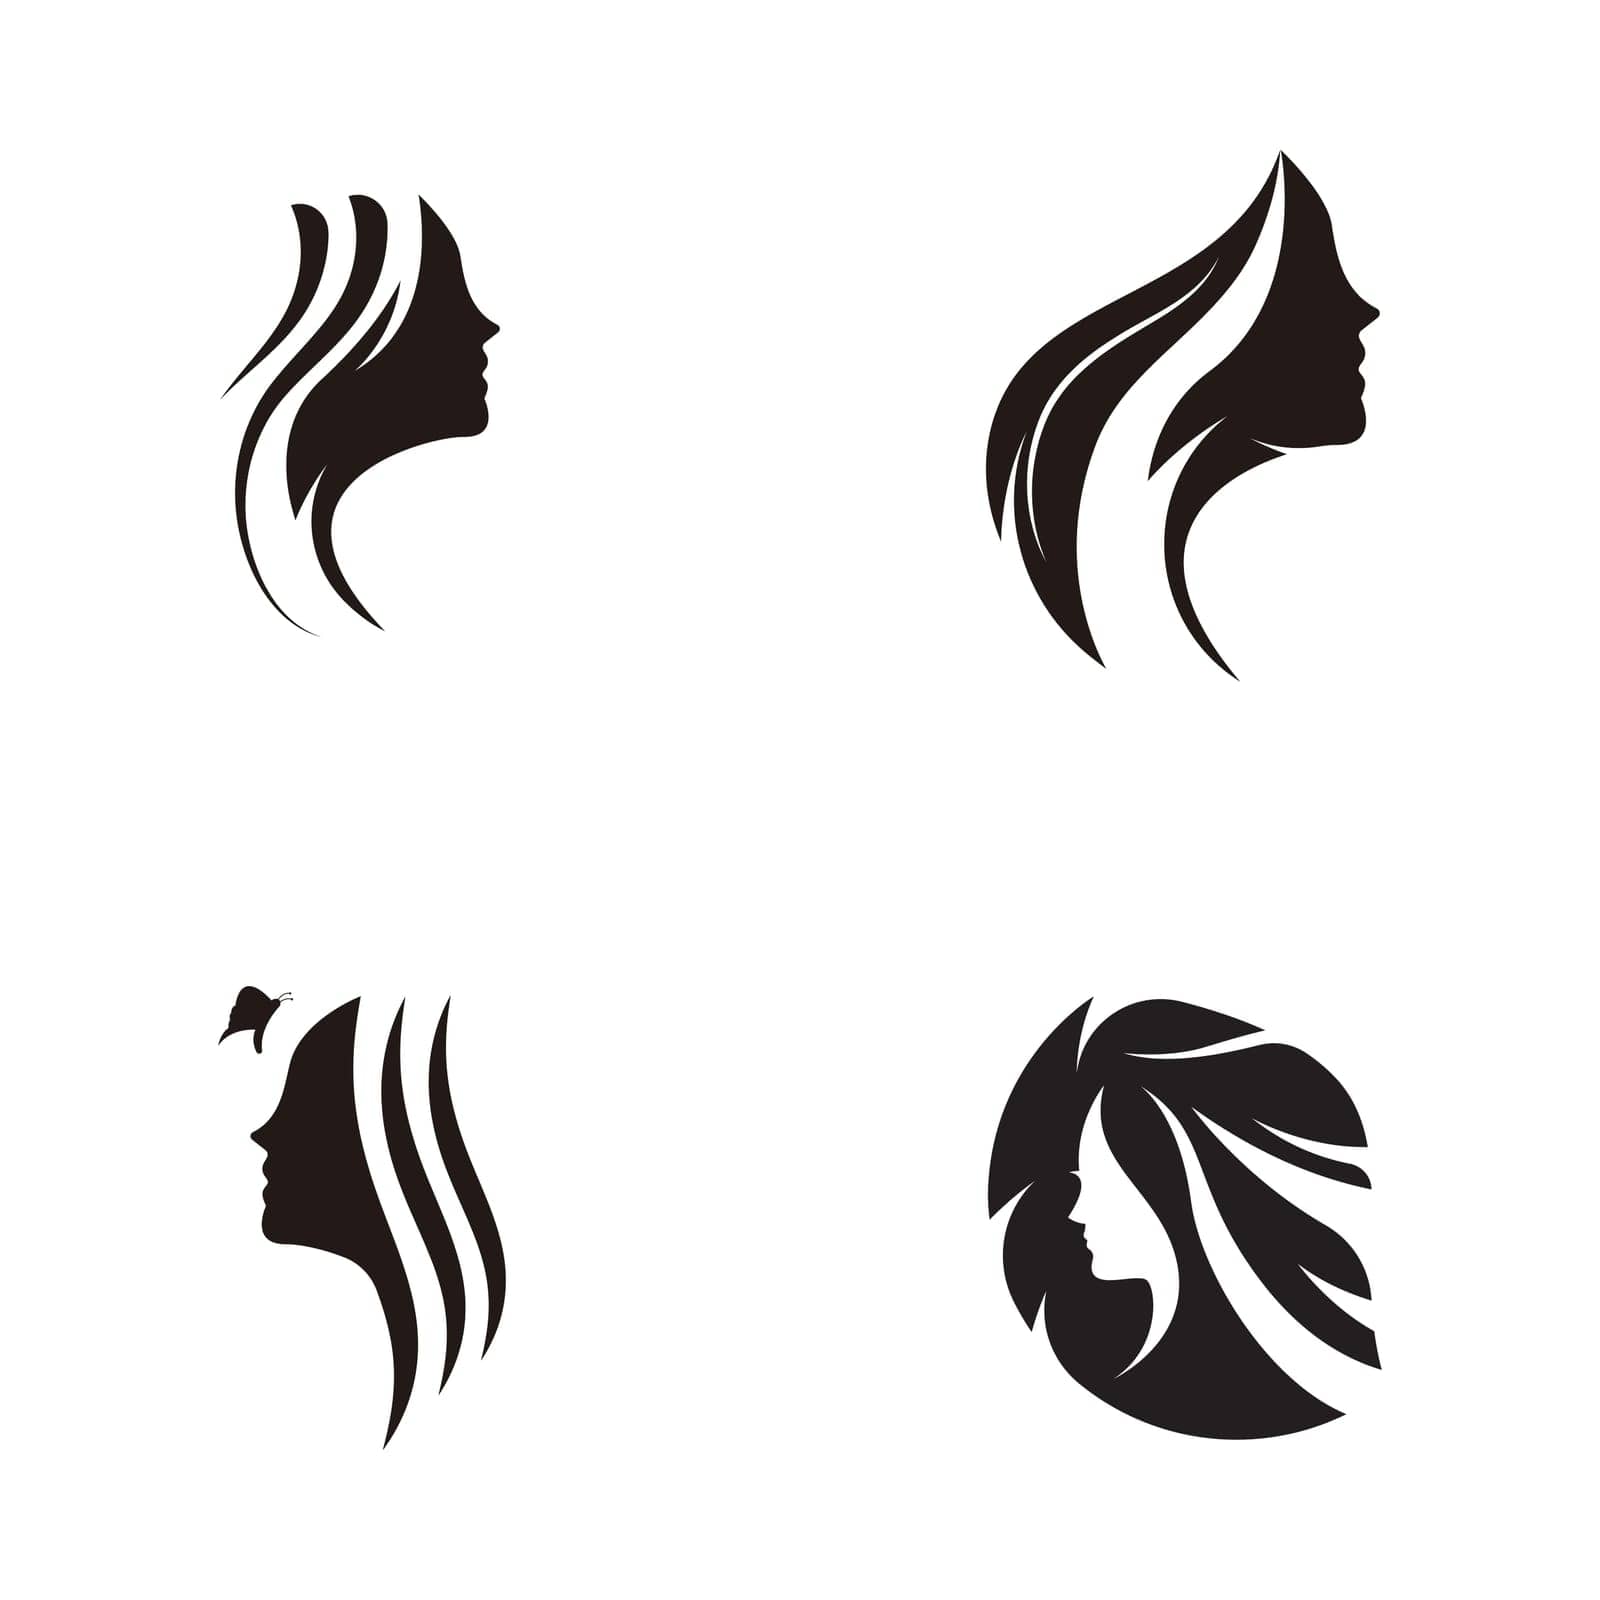 style haircut icon vector design template illustration by Mrsongrphc